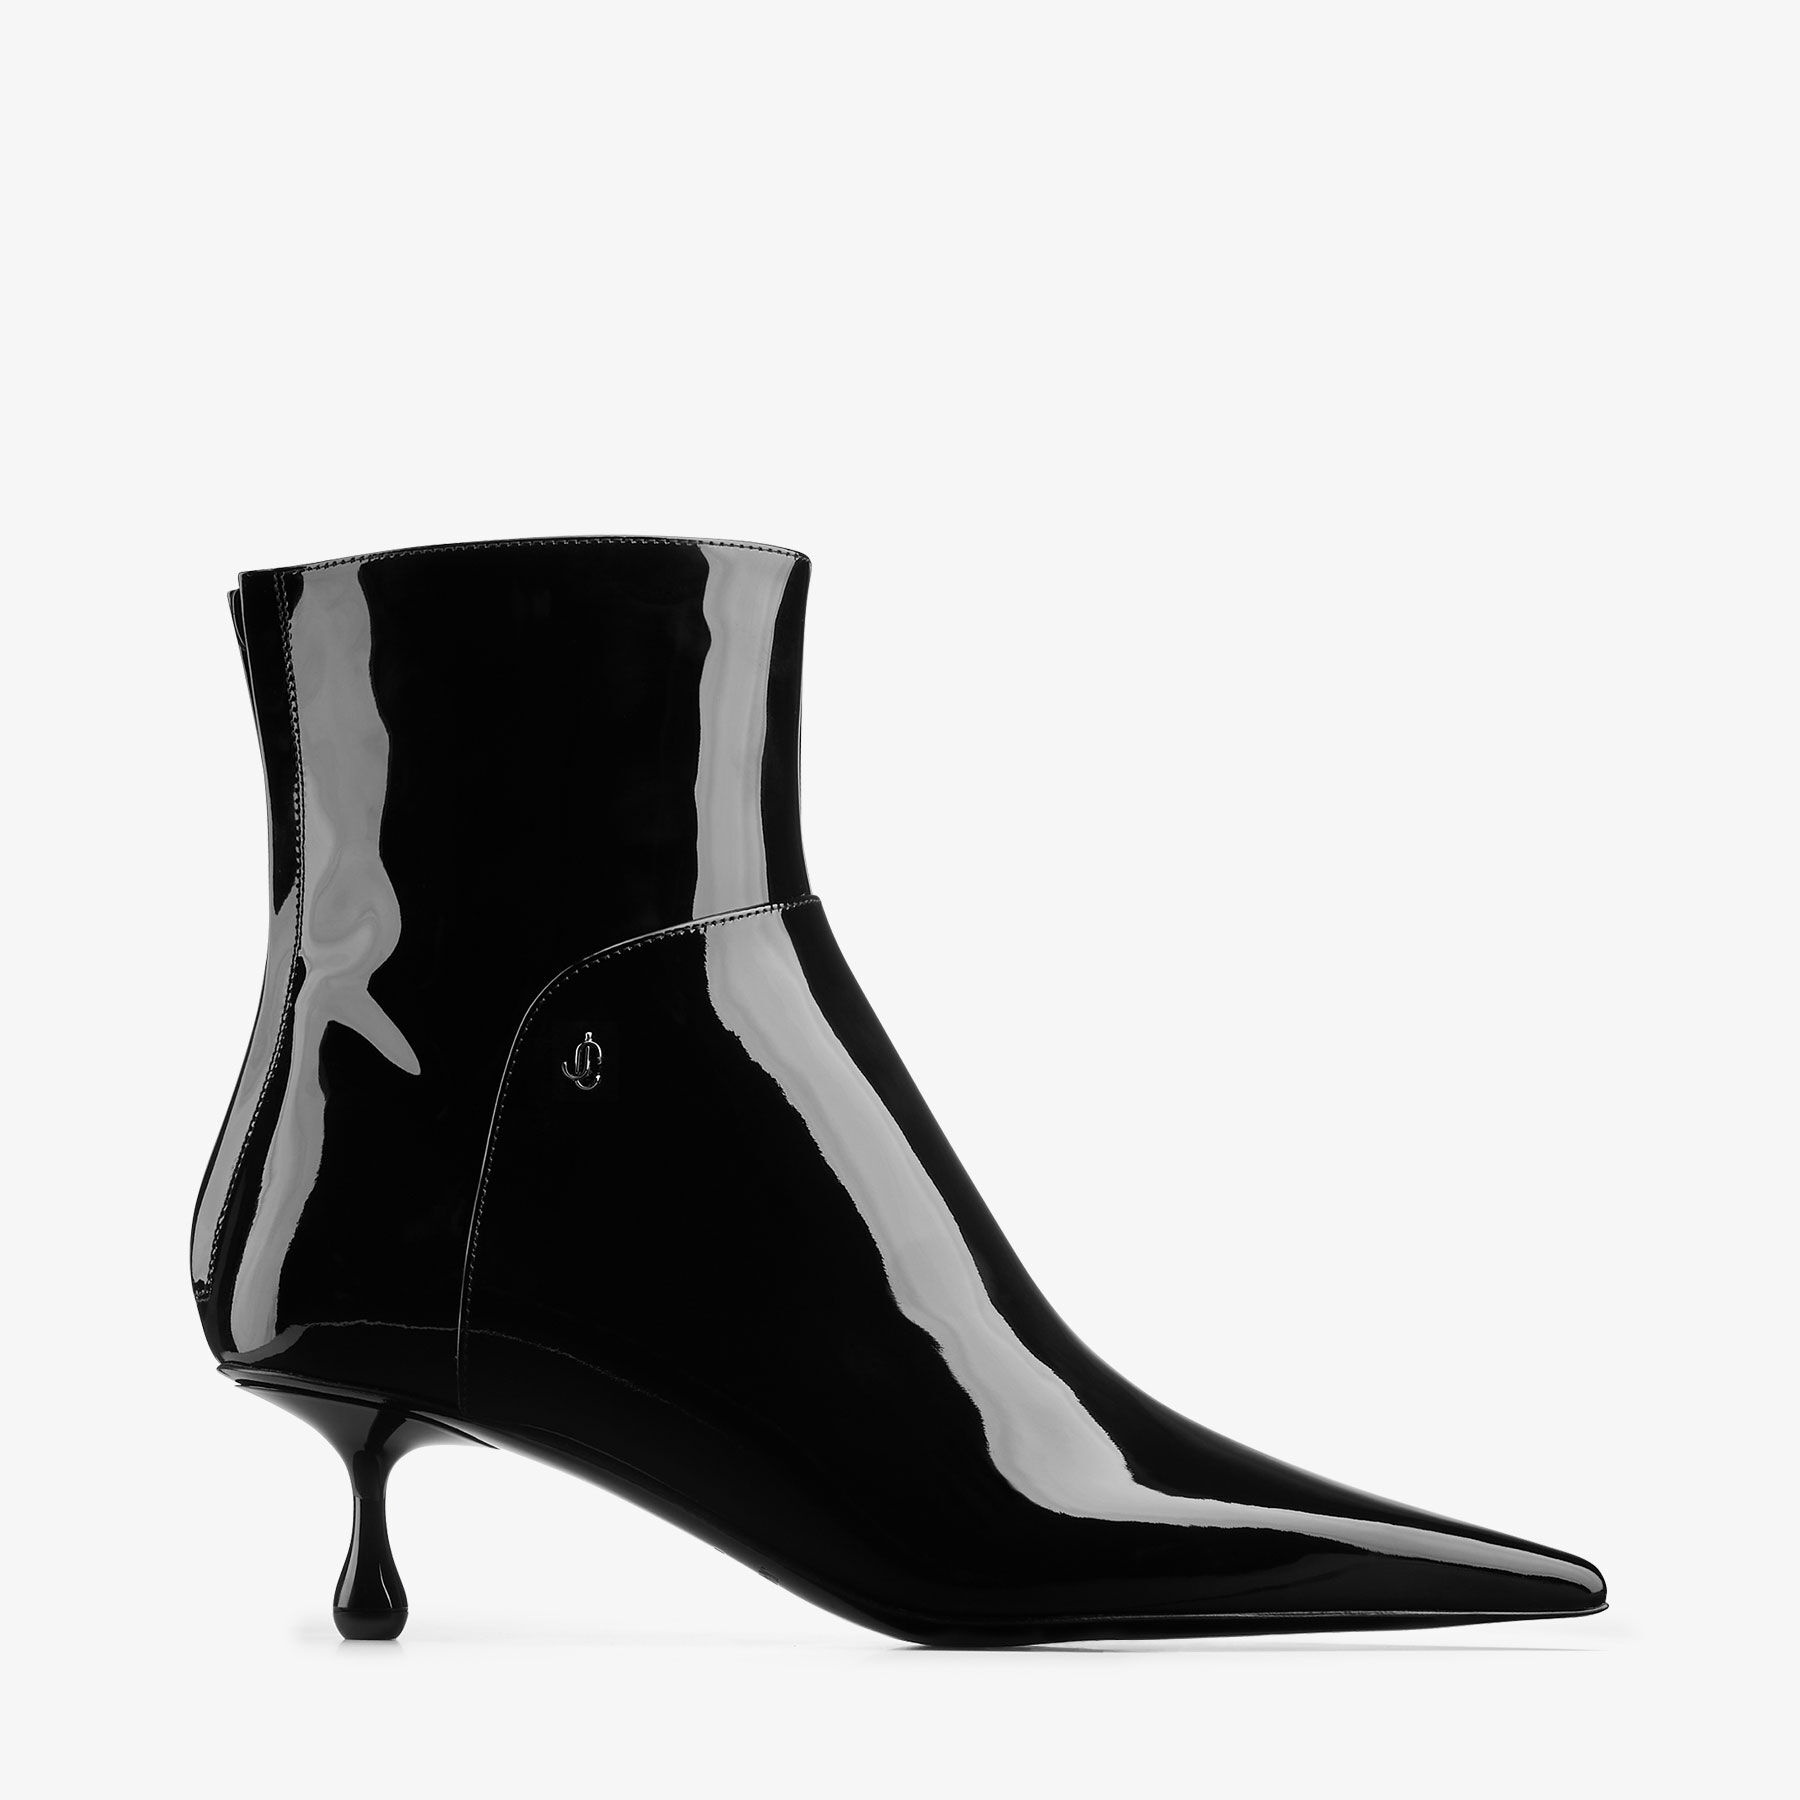 Cycas Ankle Boot 50
Black Patent Leather Ankle Boots - 1